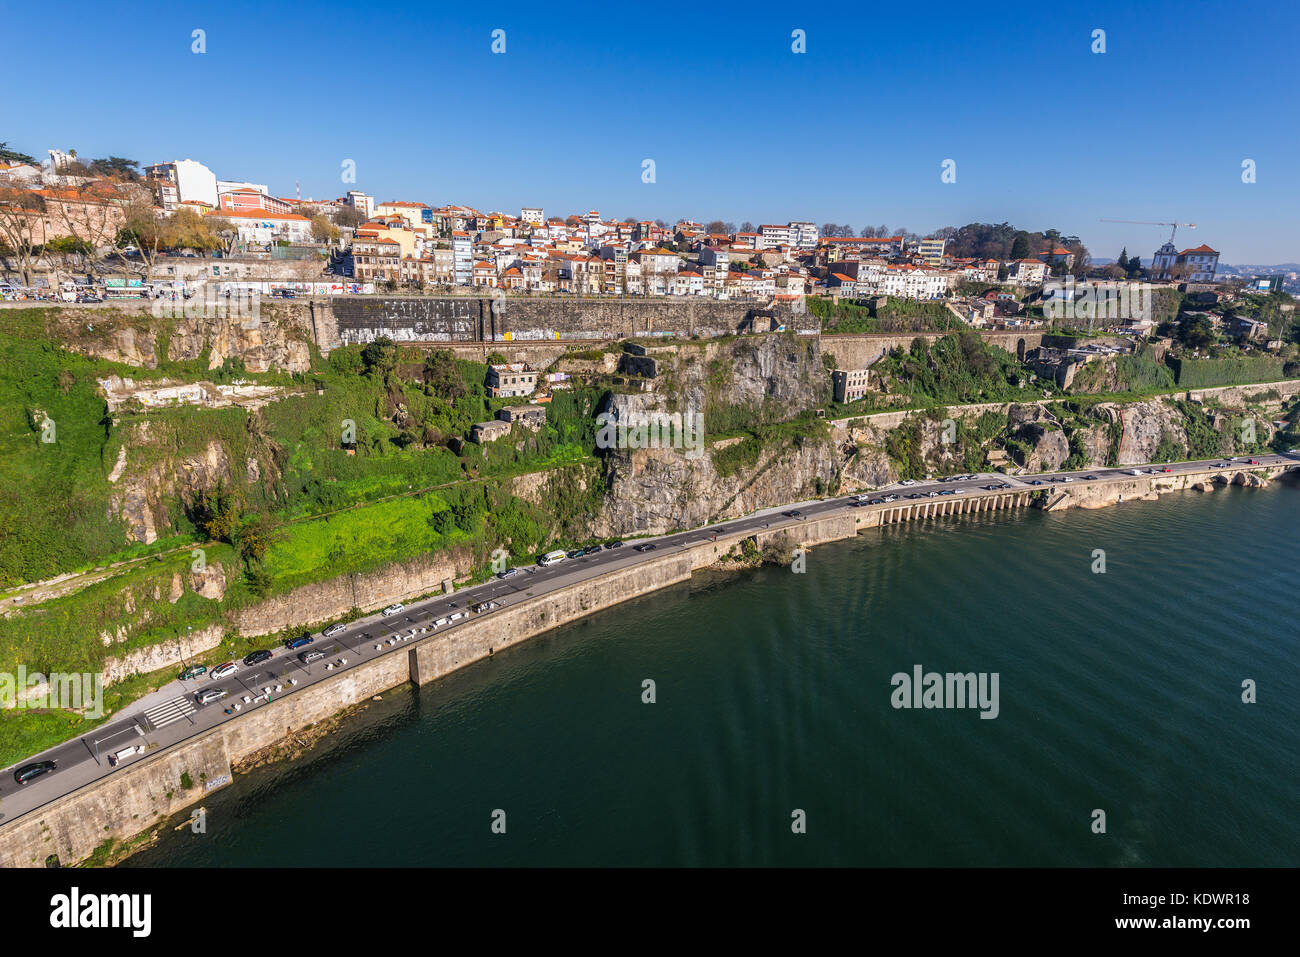 Paiva Couceiro Avenue over Douro River in Porto city on Iberian Peninsula, second largest city in Portugal. View from Infante D. Henrique Bridge Stock Photo